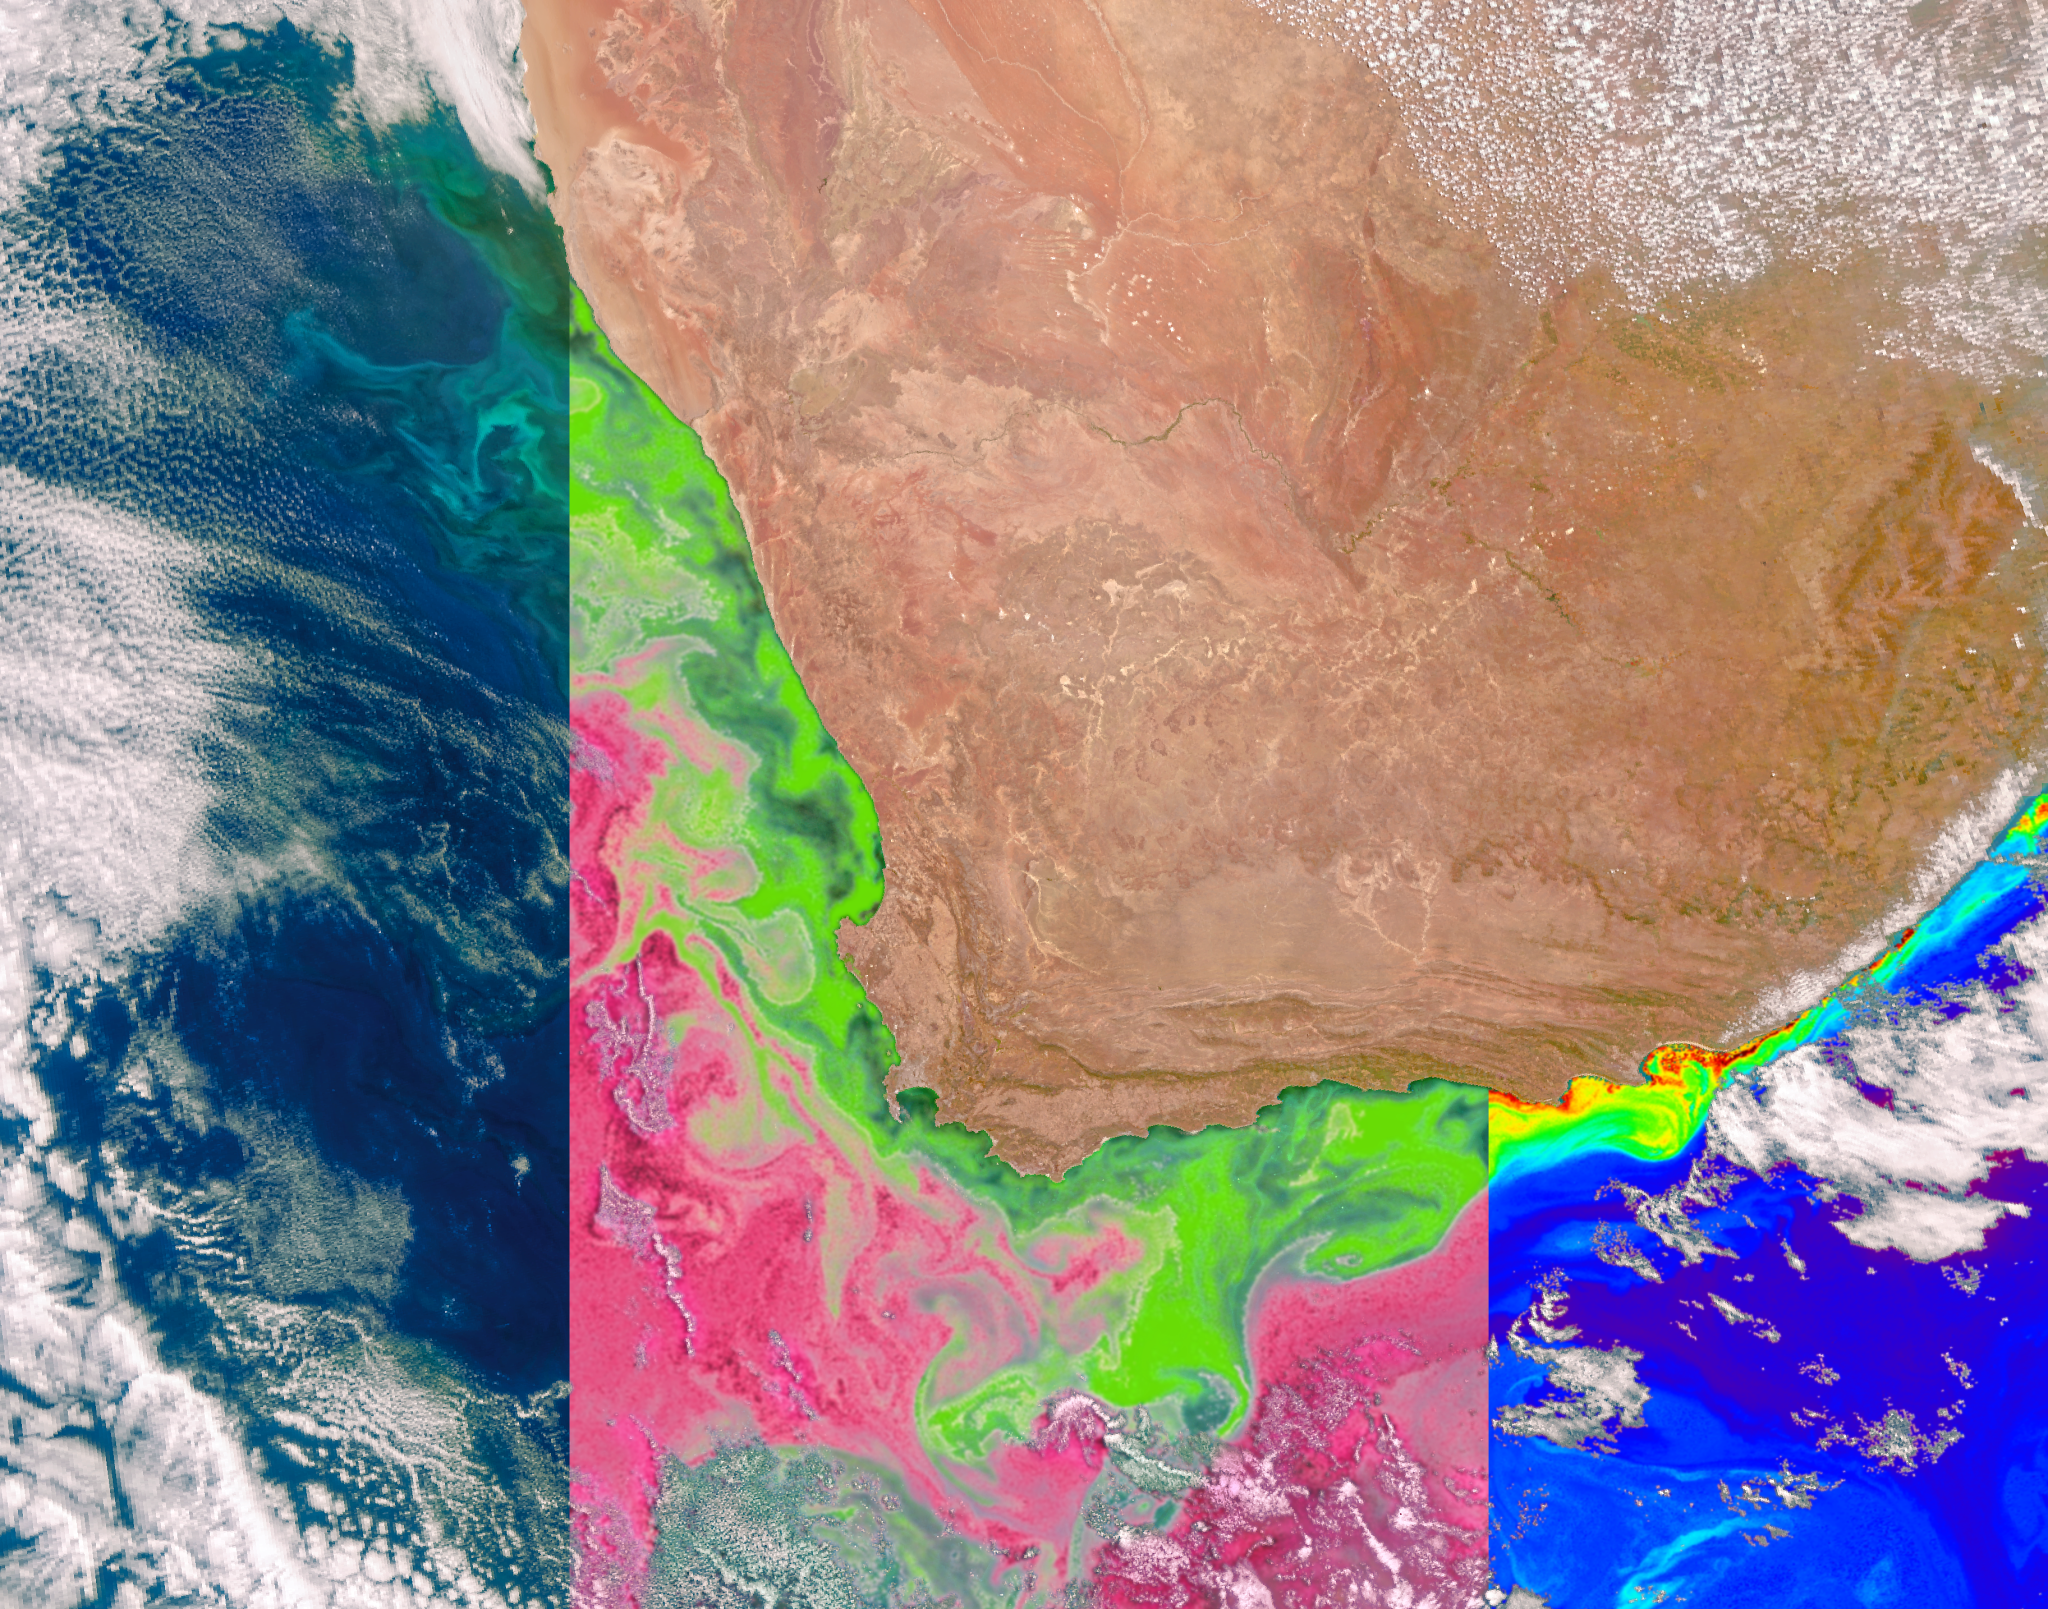 NASA’s PACE satellite’s Ocean Color Instrument (OCI) detects light across a hyperspectral range, which gives scientists new information to differentiate communities of phytoplankton – a unique ability of NASA’s newest Earth-observing satellite. This first image released from OCI identifies two different communities of these microscopic marine organisms in the ocean off the coast of South Africa on Feb. 28, 2024. The central panel of this image shows Synechococcus in pink and picoeukaryotes in green. The left panel of this image shows a natural color view of the ocean, and the right panel displays the concentration of chlorophyll-a, a photosynthetic pigment used to identify the presence of phytoplankton.